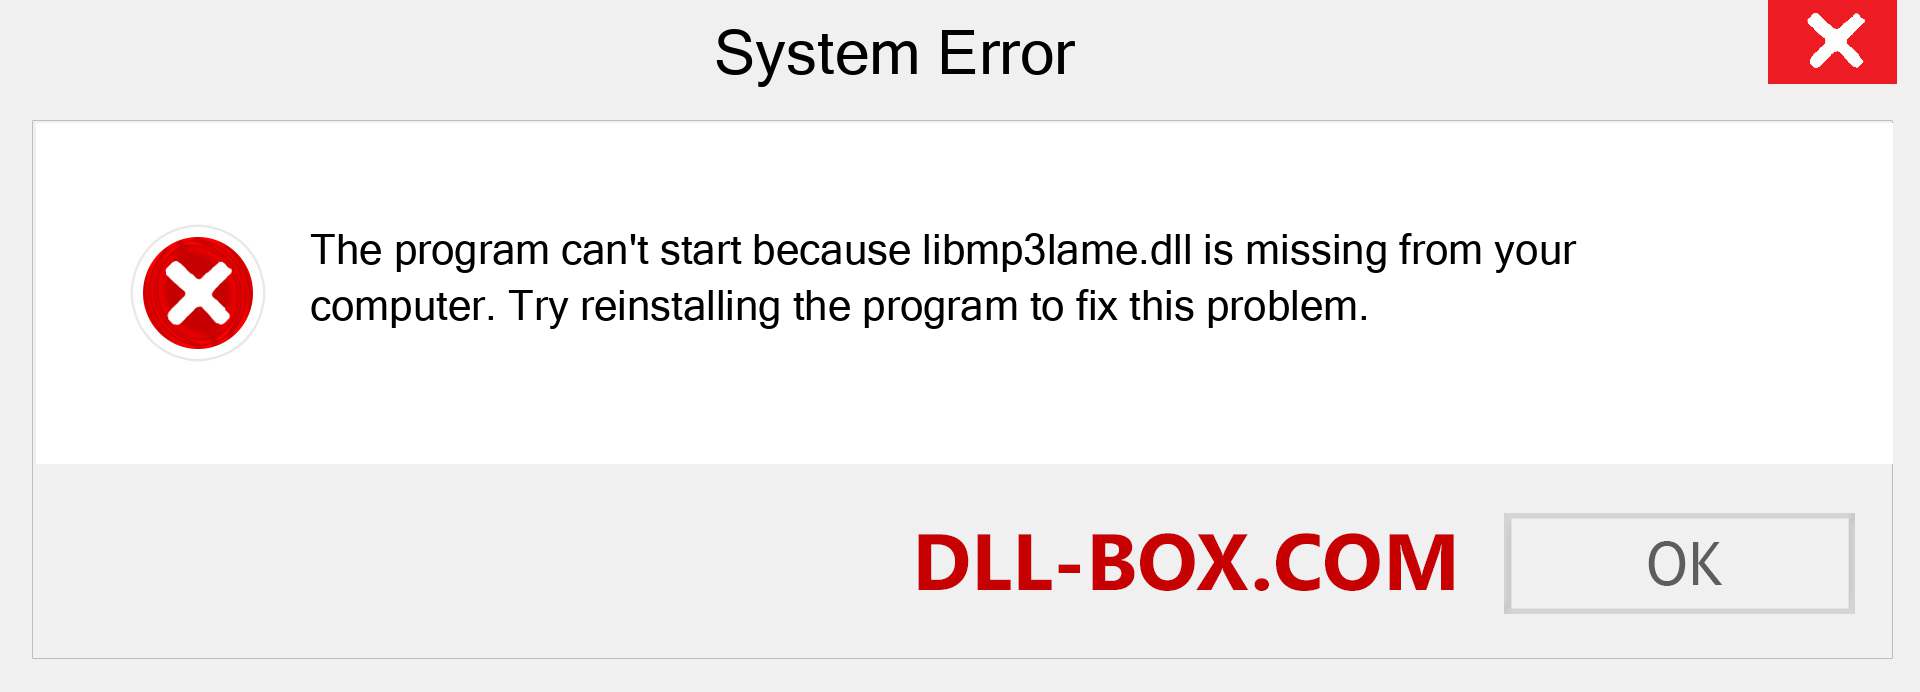  libmp3lame.dll file is missing?. Download for Windows 7, 8, 10 - Fix  libmp3lame dll Missing Error on Windows, photos, images